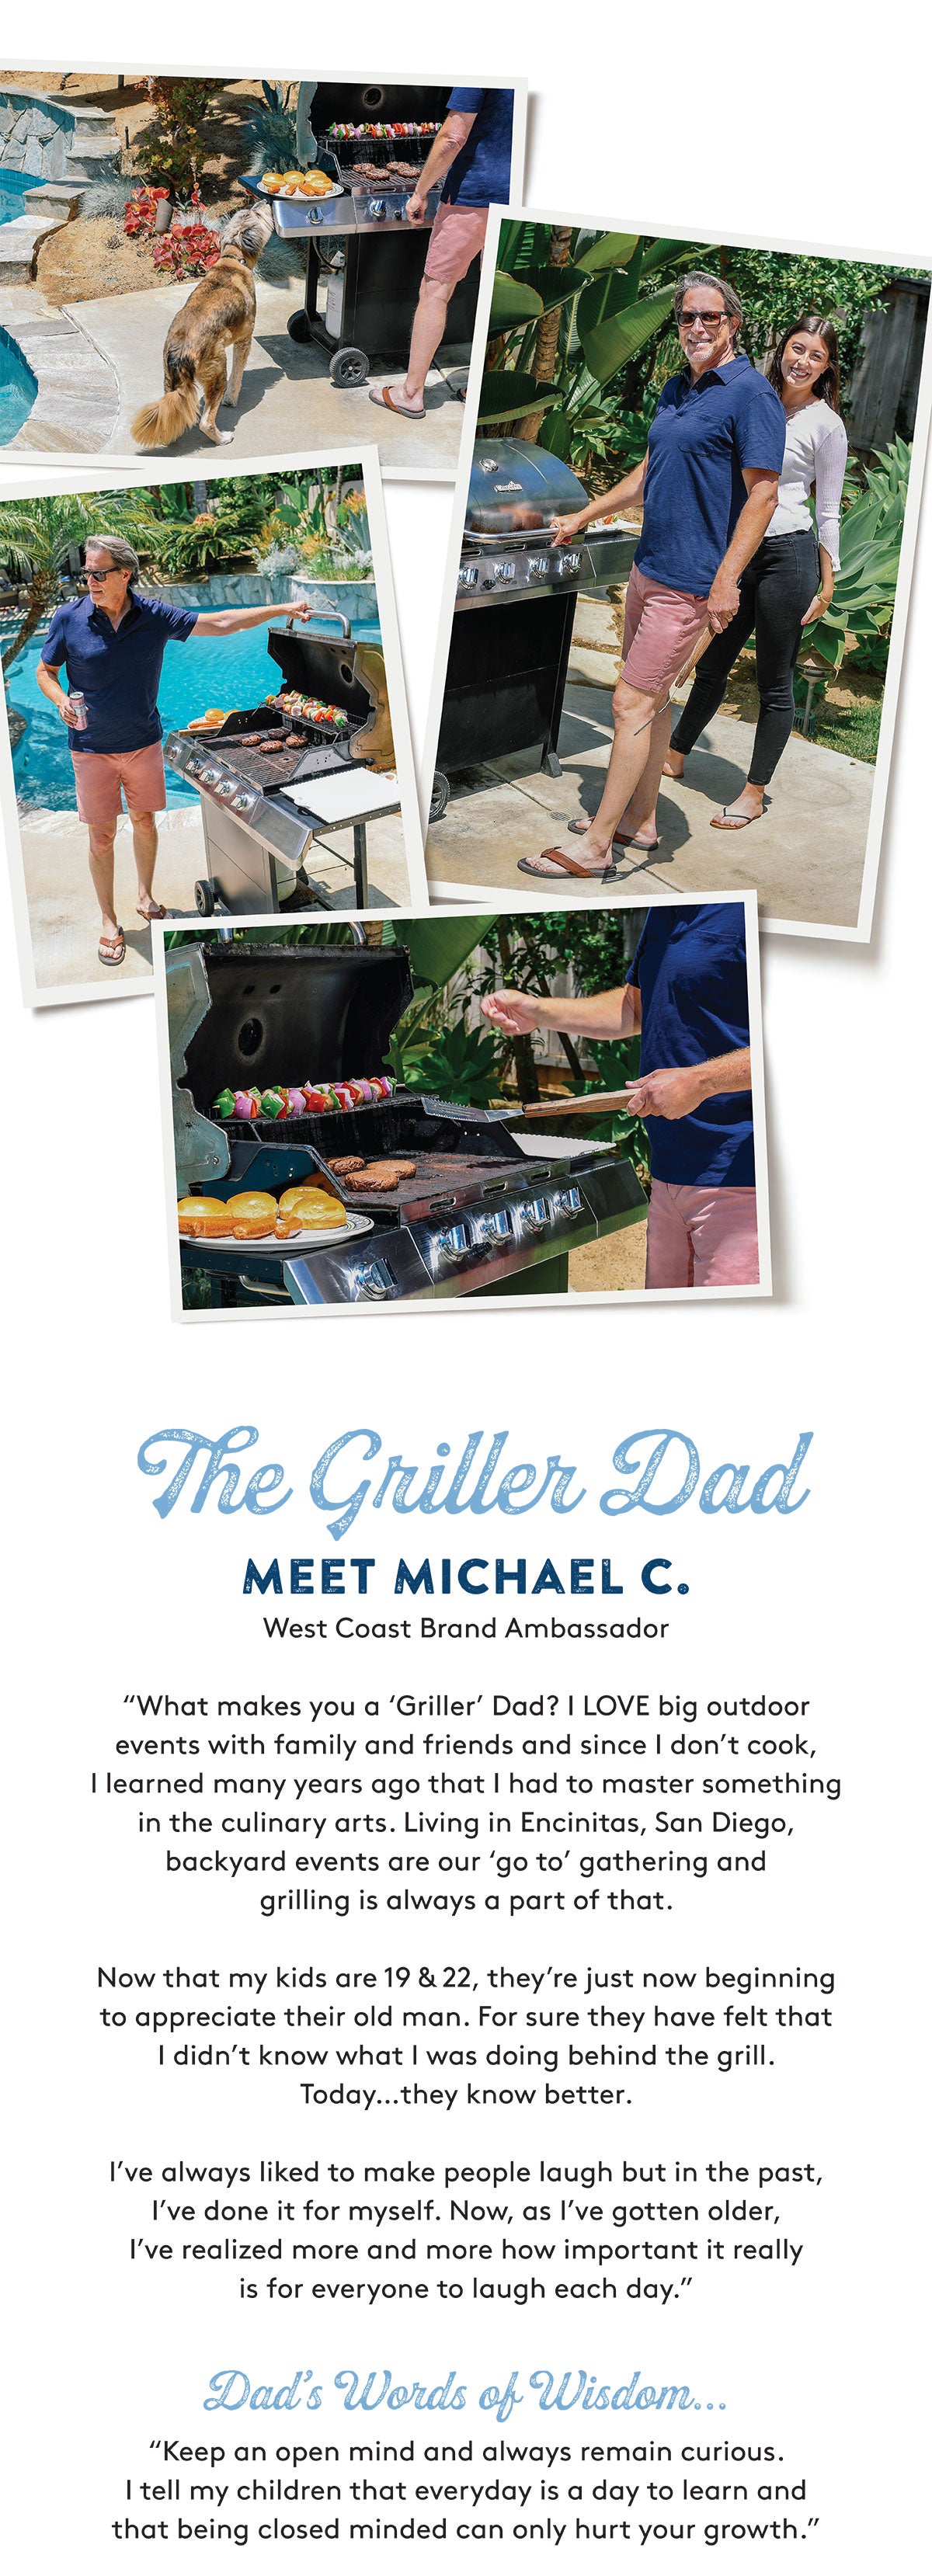 The Griller Dad MEET MICHAEL C. West Coast Brand Ambassador "What makes you a 'Griller' Dad? I LOVE big outdoor events with family and friends and since I don't cook, I learned many years ago that I had to master something in the culinary arts. Living in Encinitas, San Diego, backyard events are our 'go to' gathering and grilling is always a part of that. Now that my kids are 19 & 22, they're just now beginning to appreciate their old man. For sure they have felt that I didn't know what I was doing behind the grill. Today…they know better. I've always liked to make people laugh but in the past, I've done it for myself. Now, as I've gotten older, I've realized more and more how important it really is for everyone to laugh each day." Dad's Words of Wisdom... "Keep an open mind and always remain curious. I tell my children that everyday is a day to learn and that being closed minded can only hurt your growth."